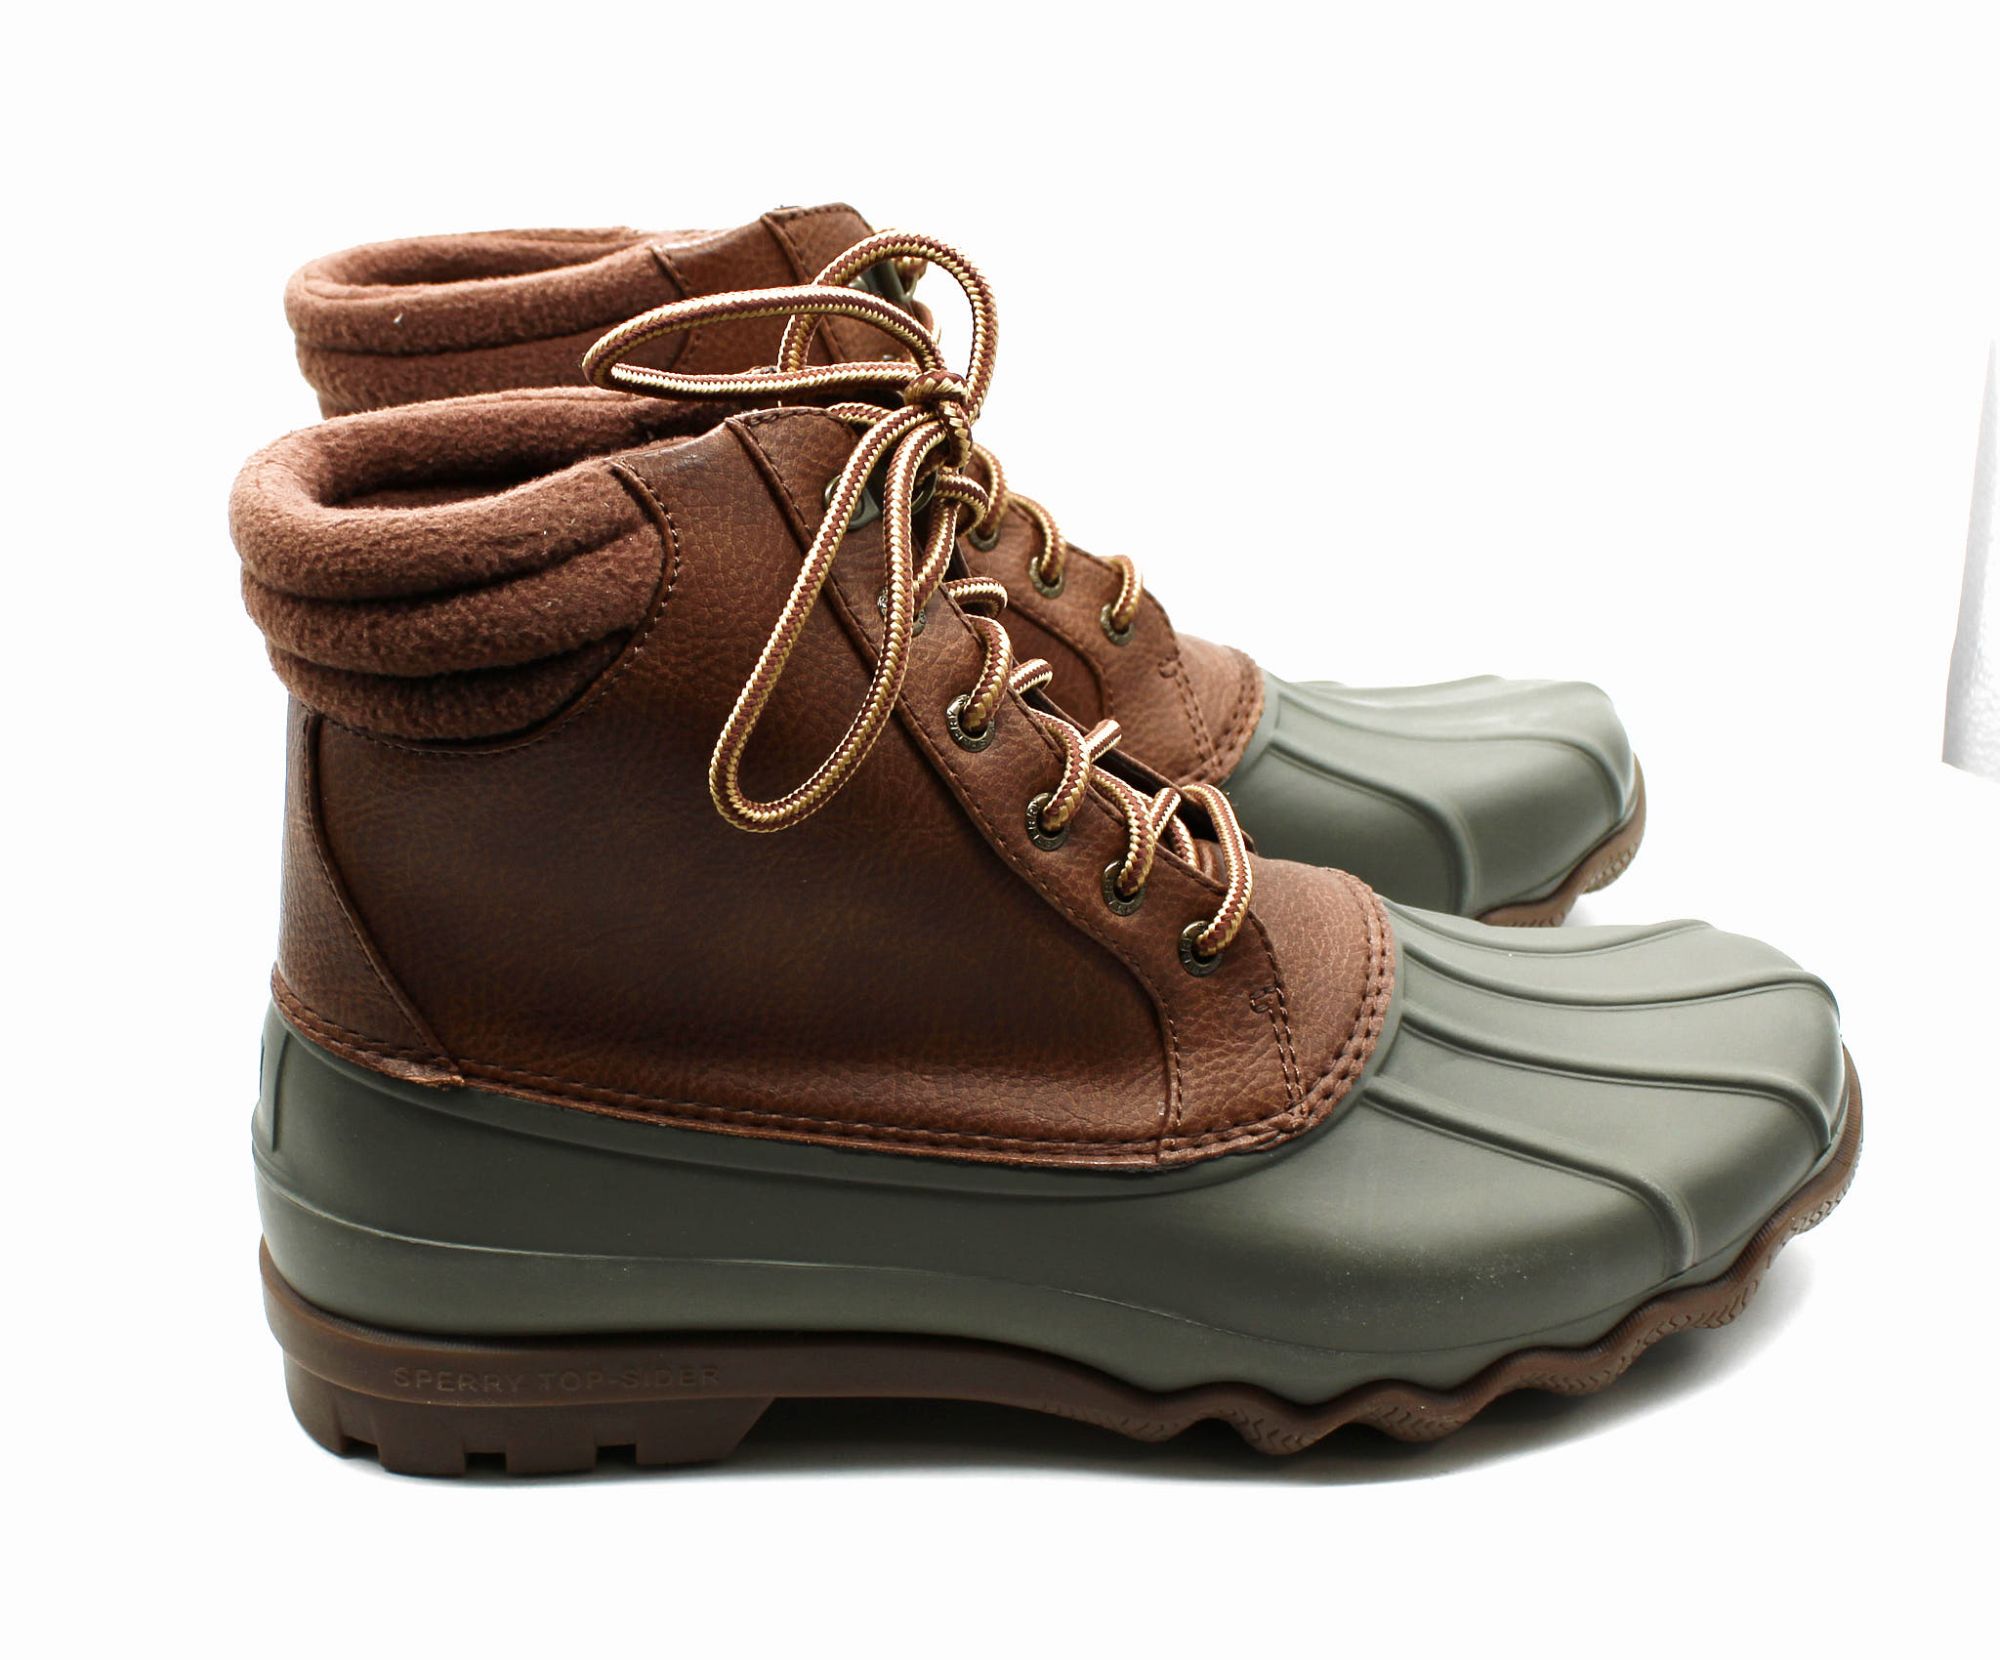 Sperry Men's Avenue Duck Boots - Classic Style and Weather